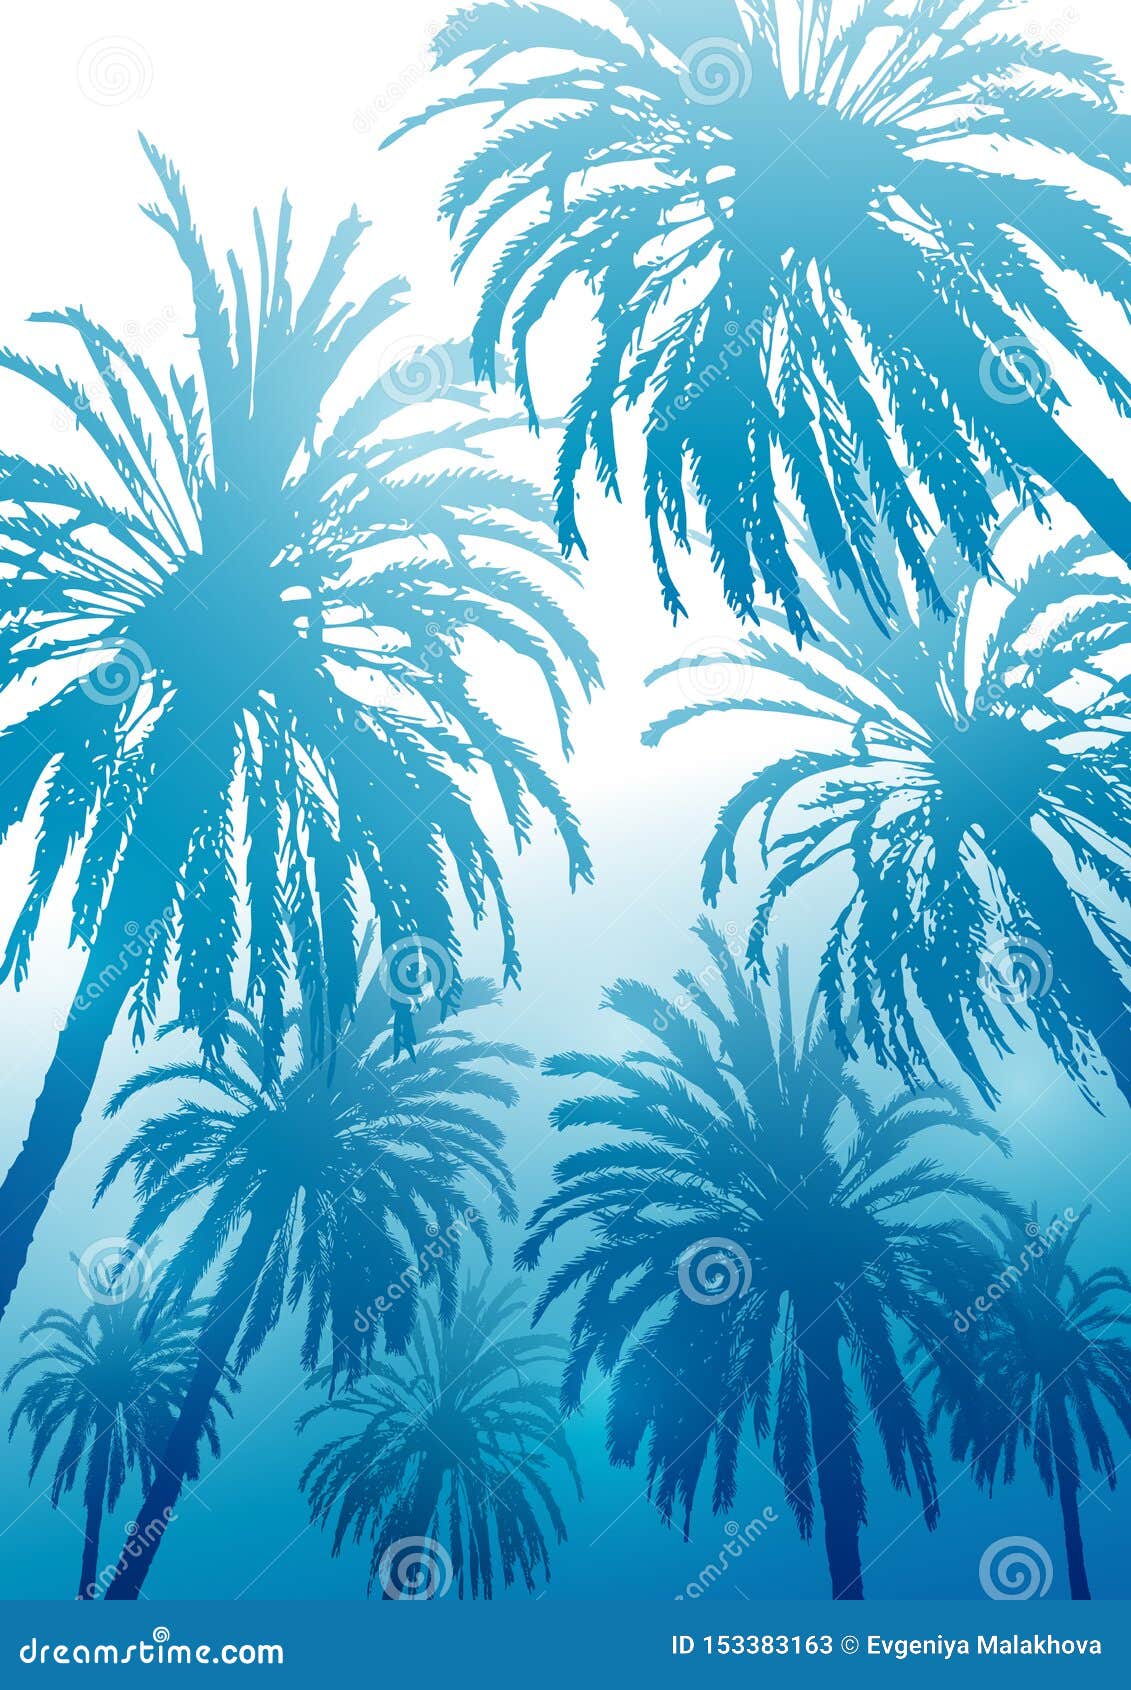 Summer Tropical Background with Palm Trees Silhouettes on Blue Stock Vector  - Illustration of season, vector: 153383163